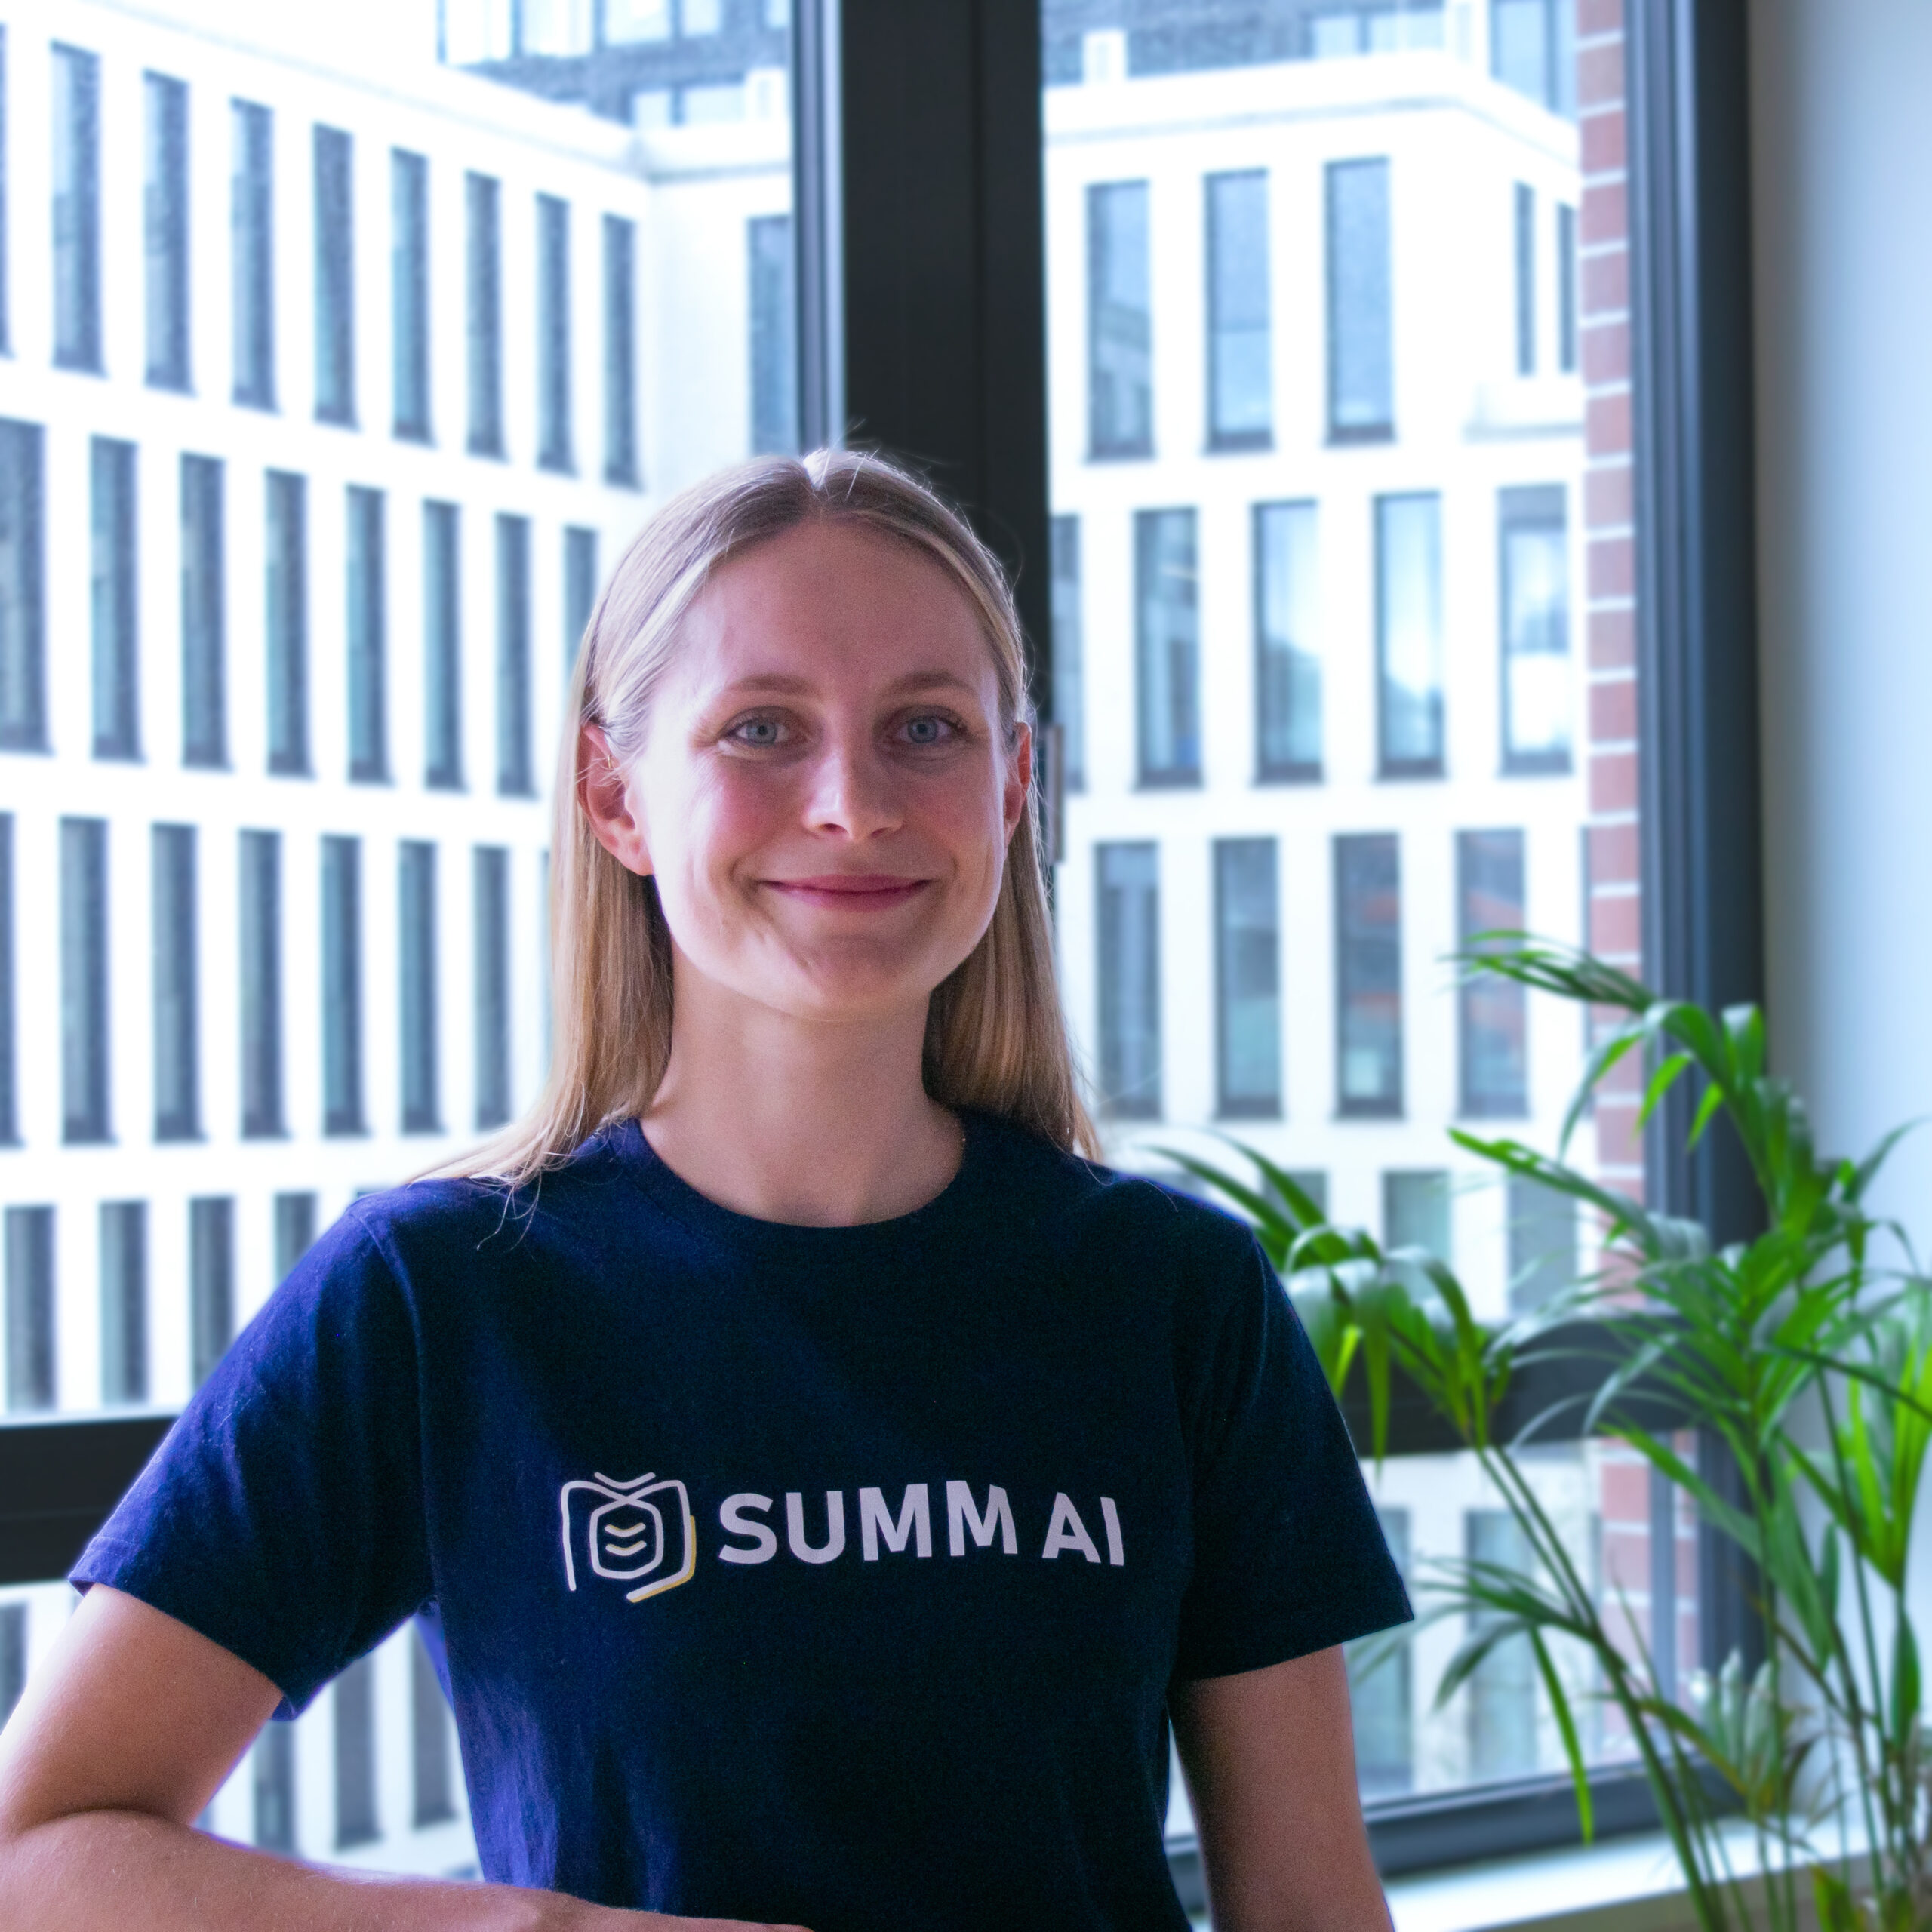 This is a picture of Vanessa. Vanessa is a co-founder of SUMM. Vanessa is COO, which means Chief Operations Officer.